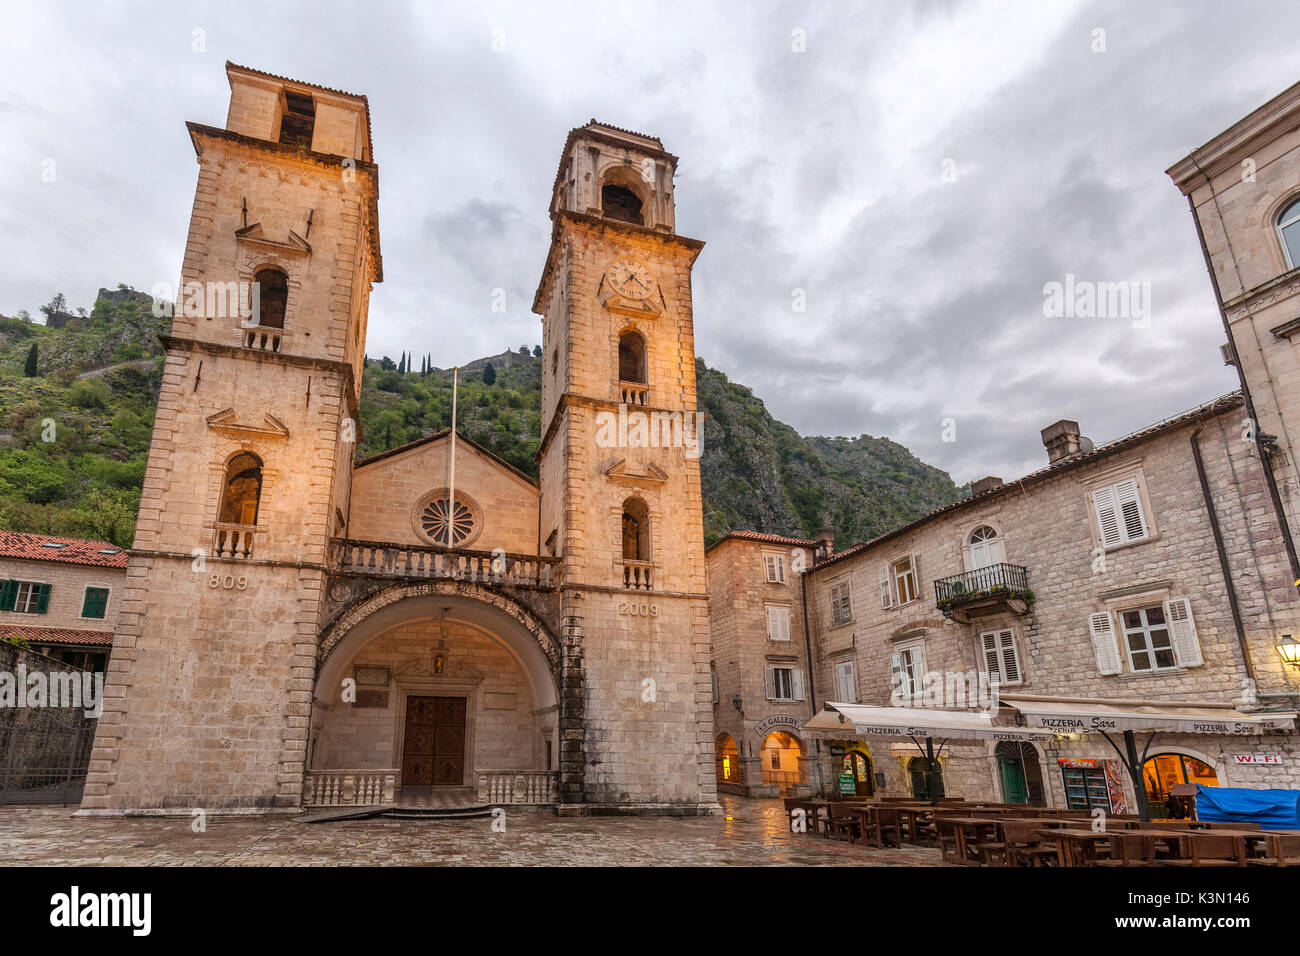 Cathedral of St. Tryphon, view of the exterior facade, Kotor old city, Montenegro Stock Photo